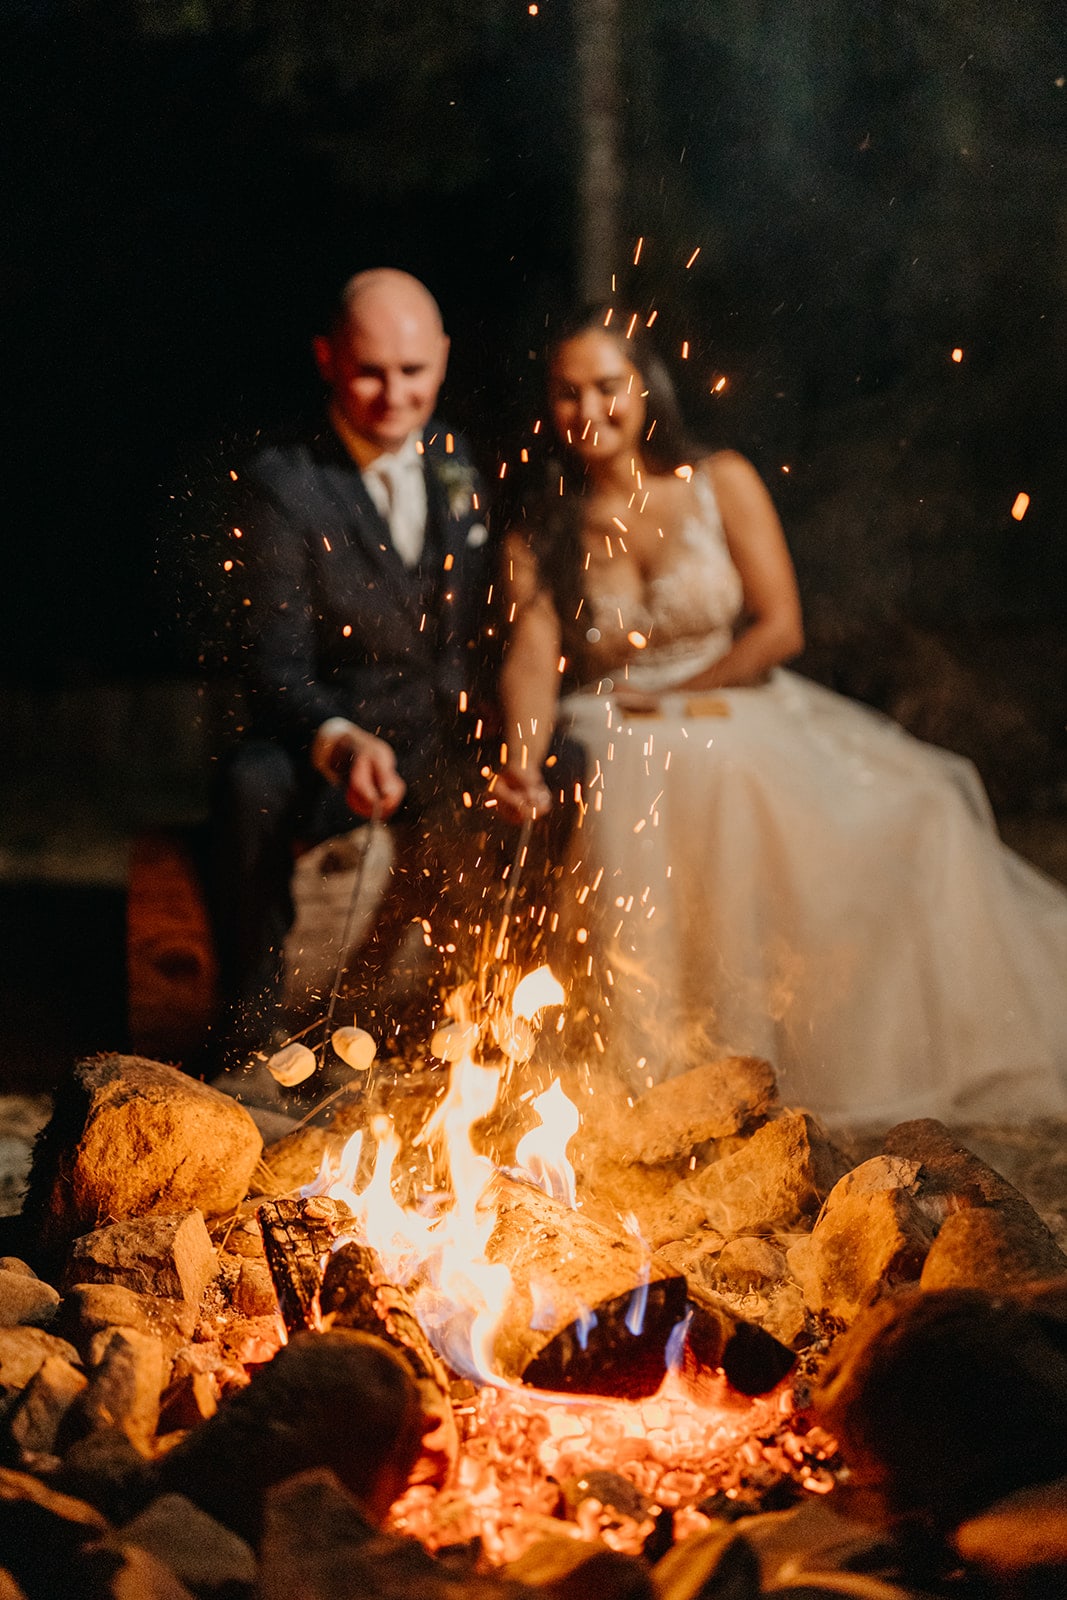 The couple roasts marshmallows by fire. 